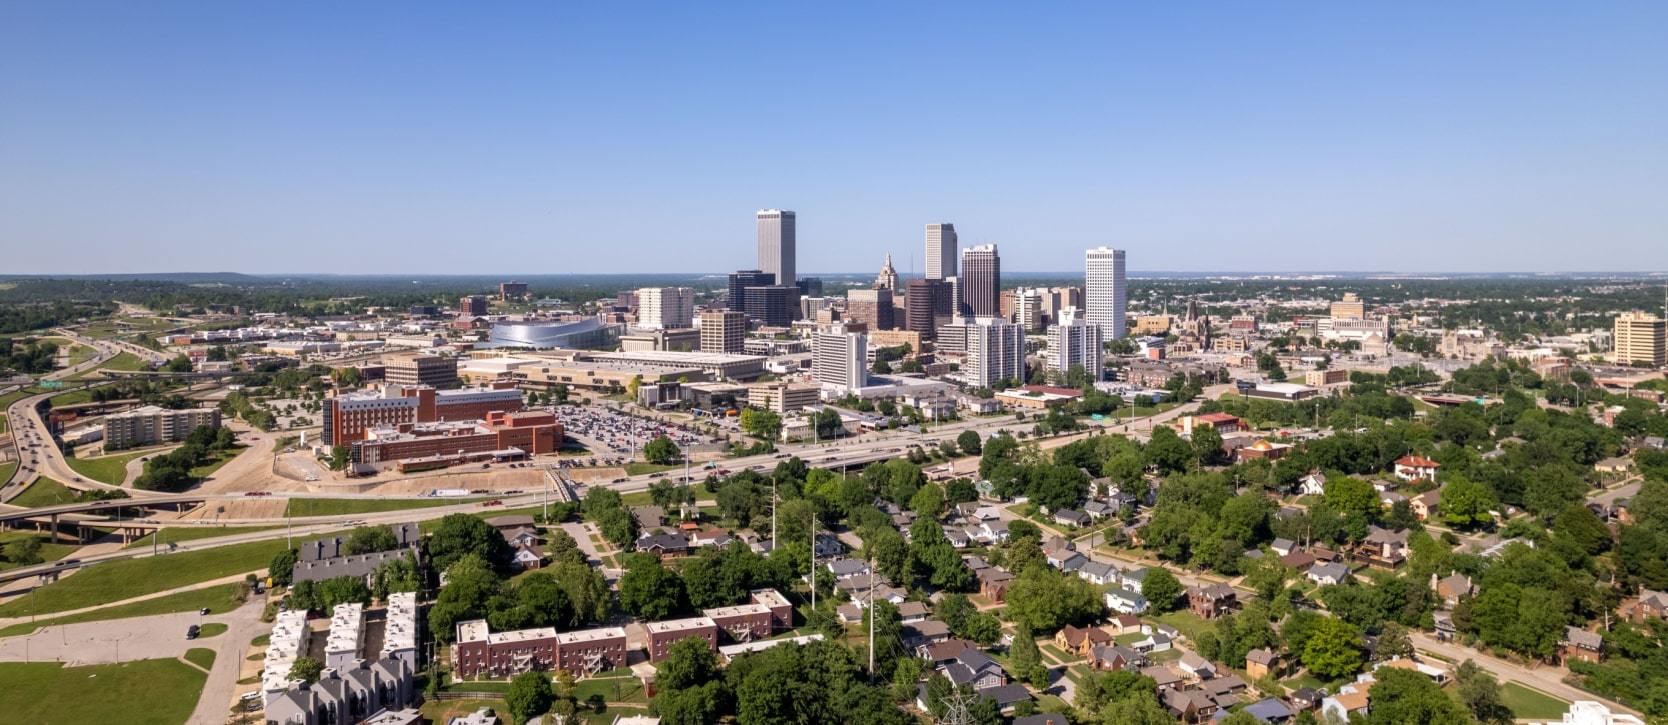 Panoramic view of Oklahoma City and city residential homes